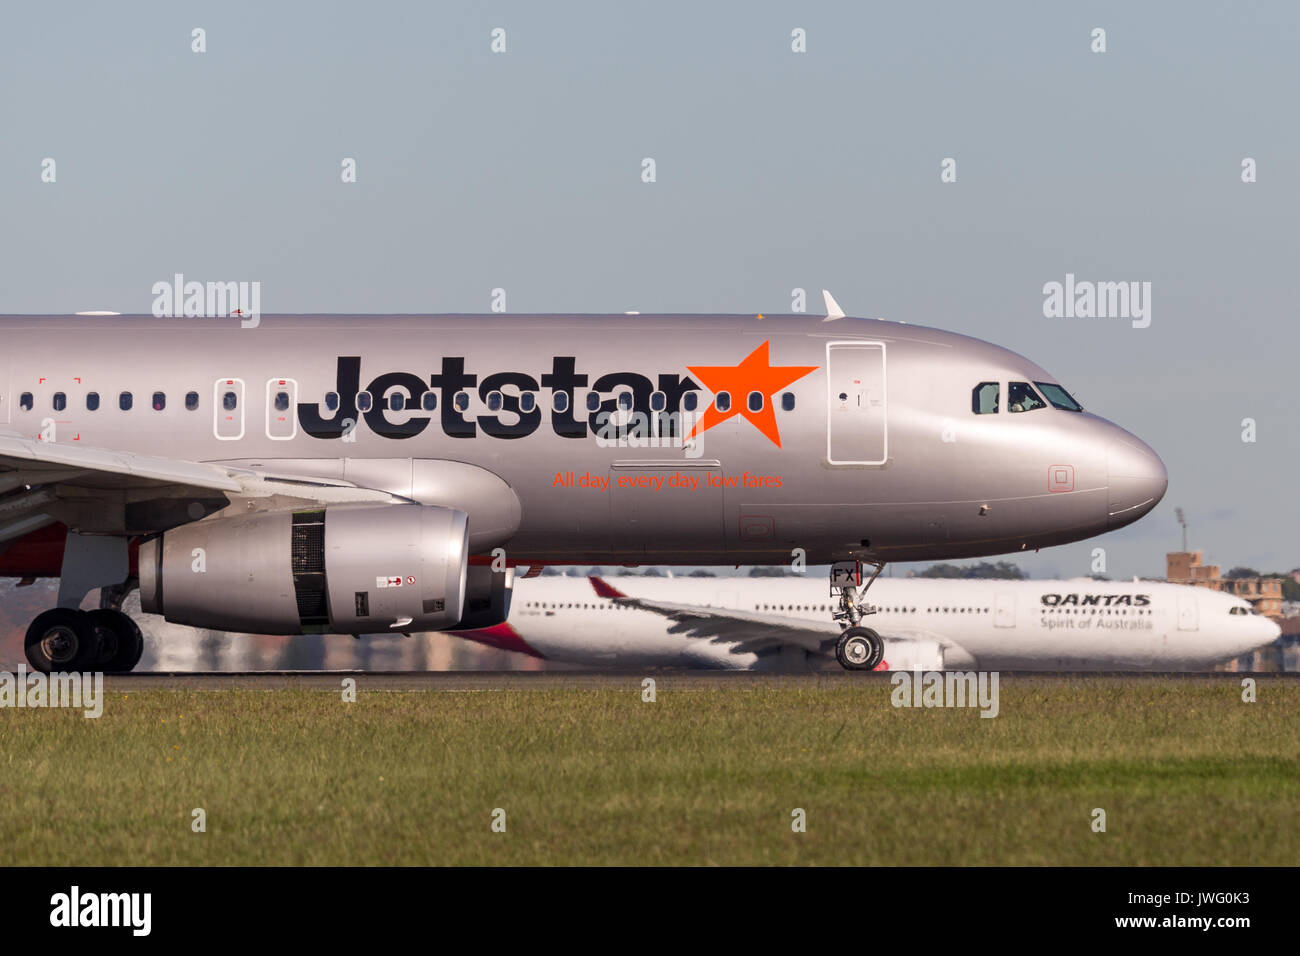 Jetstar Airways Airbus A320 airliner landing at Sydney Airport with a Qantas aircraft in the background. Stock Photo